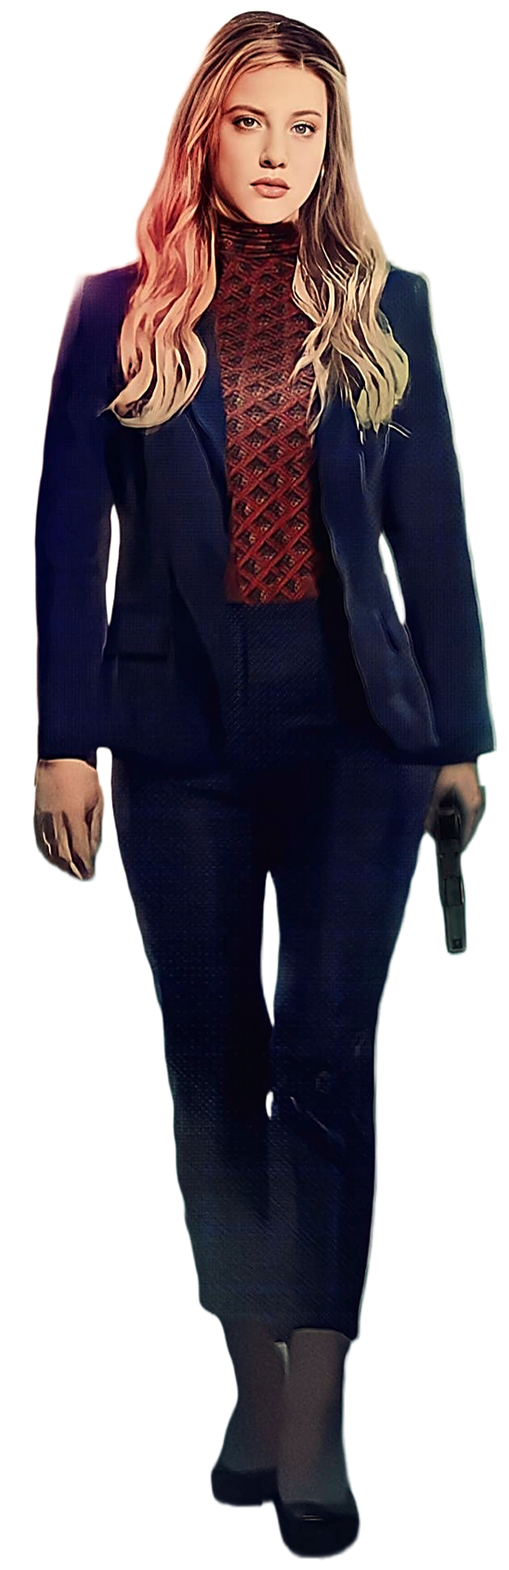 Riverdale Betty Cooper PNG 1 by Beamyth2018 on DeviantArt